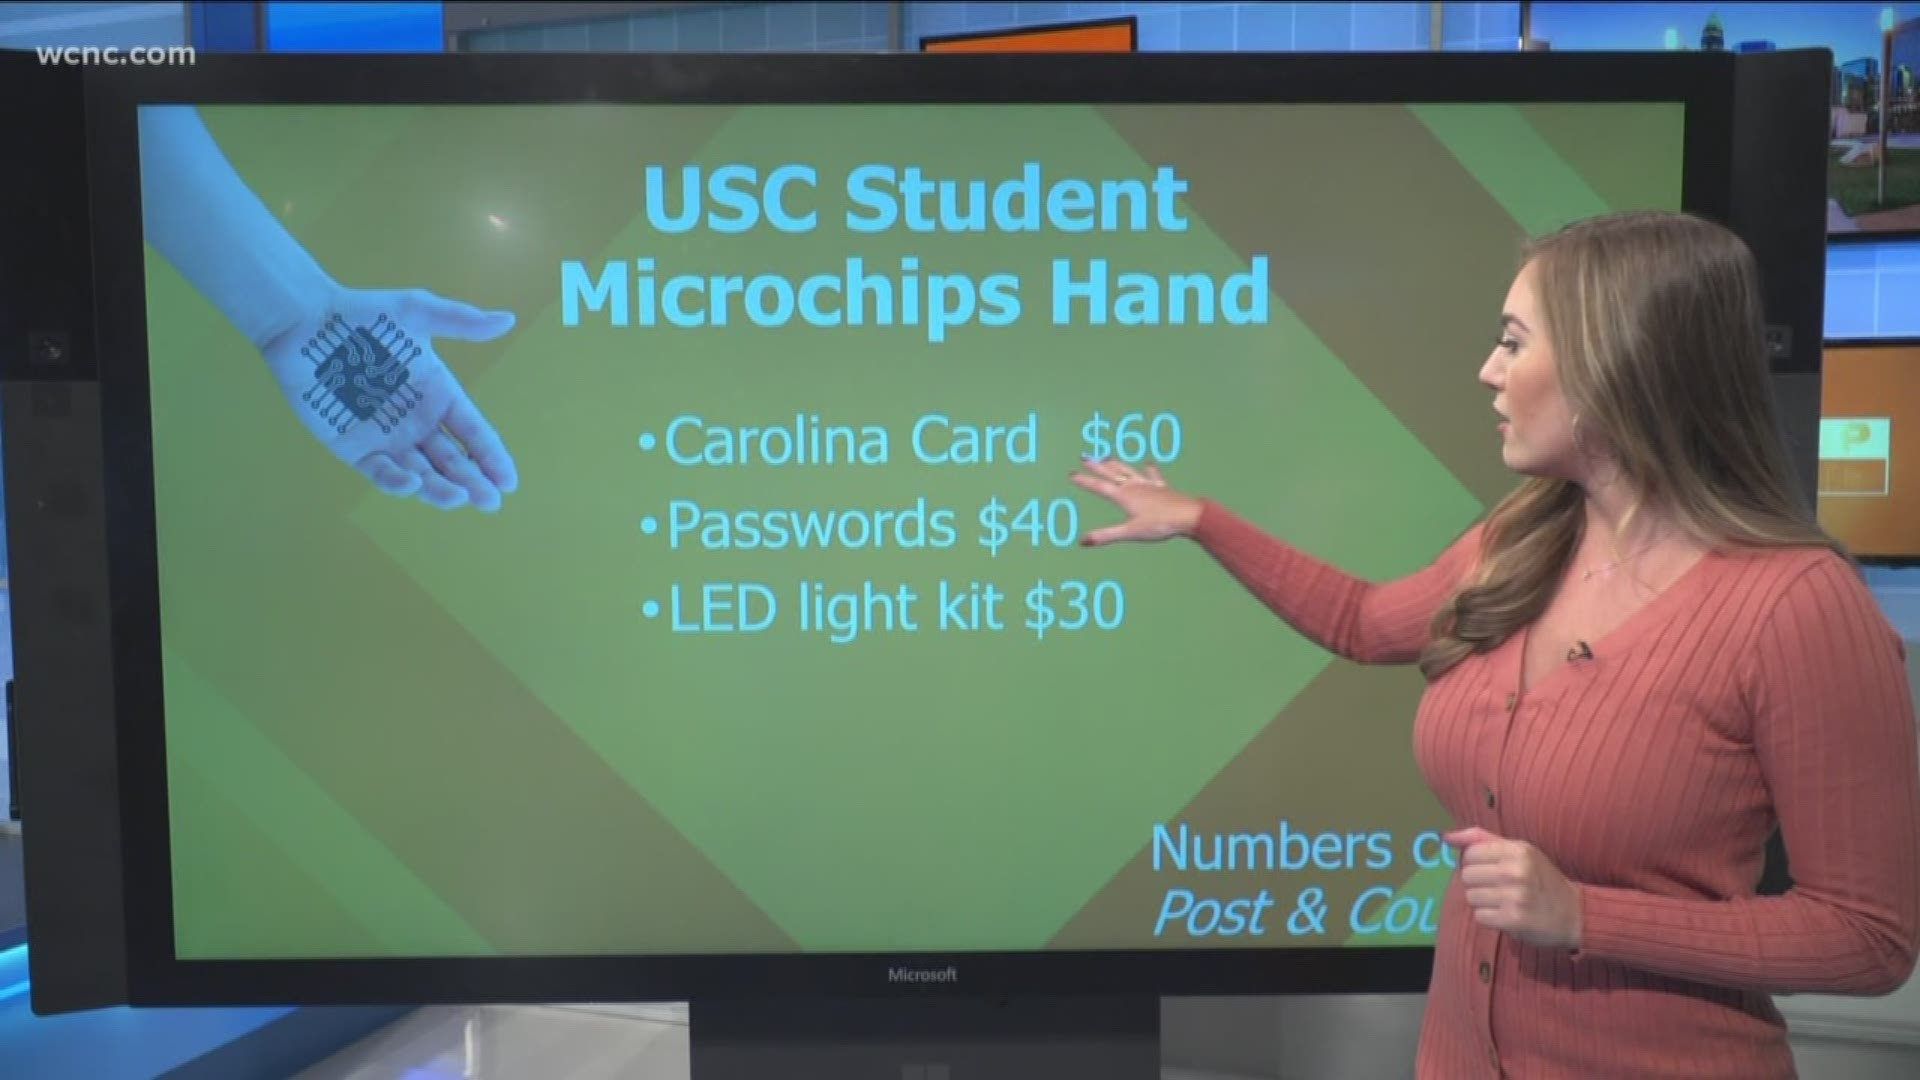 A first-year computer science student at the University of South Carolina won't ever have to worry about losing his student ID again thanks to a microchip.